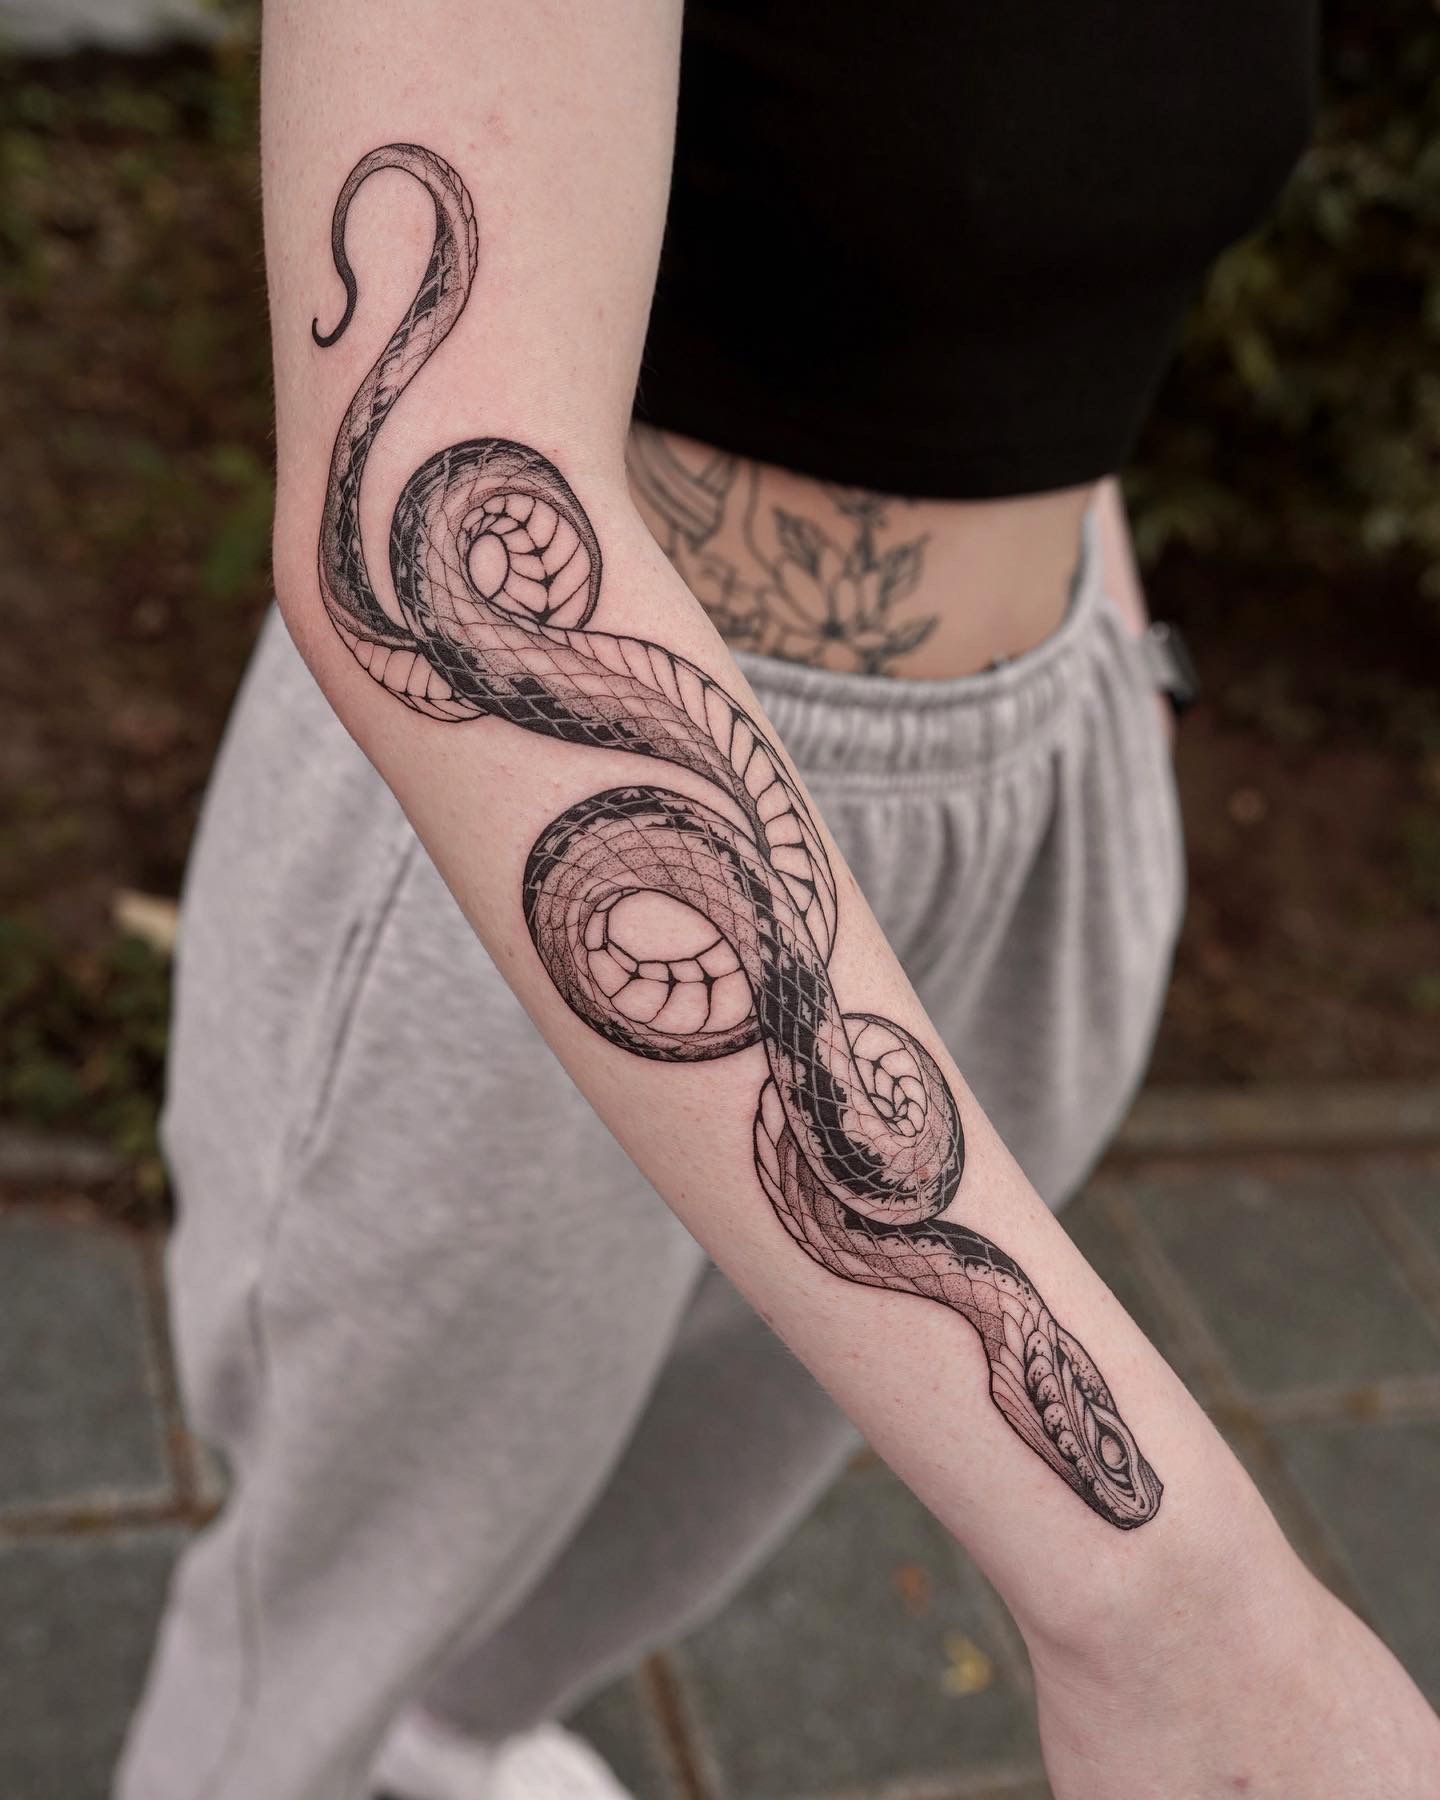 30 Best Snake Tattoo Designs To Inspire You The Art of Curls  Saved  Tattoo